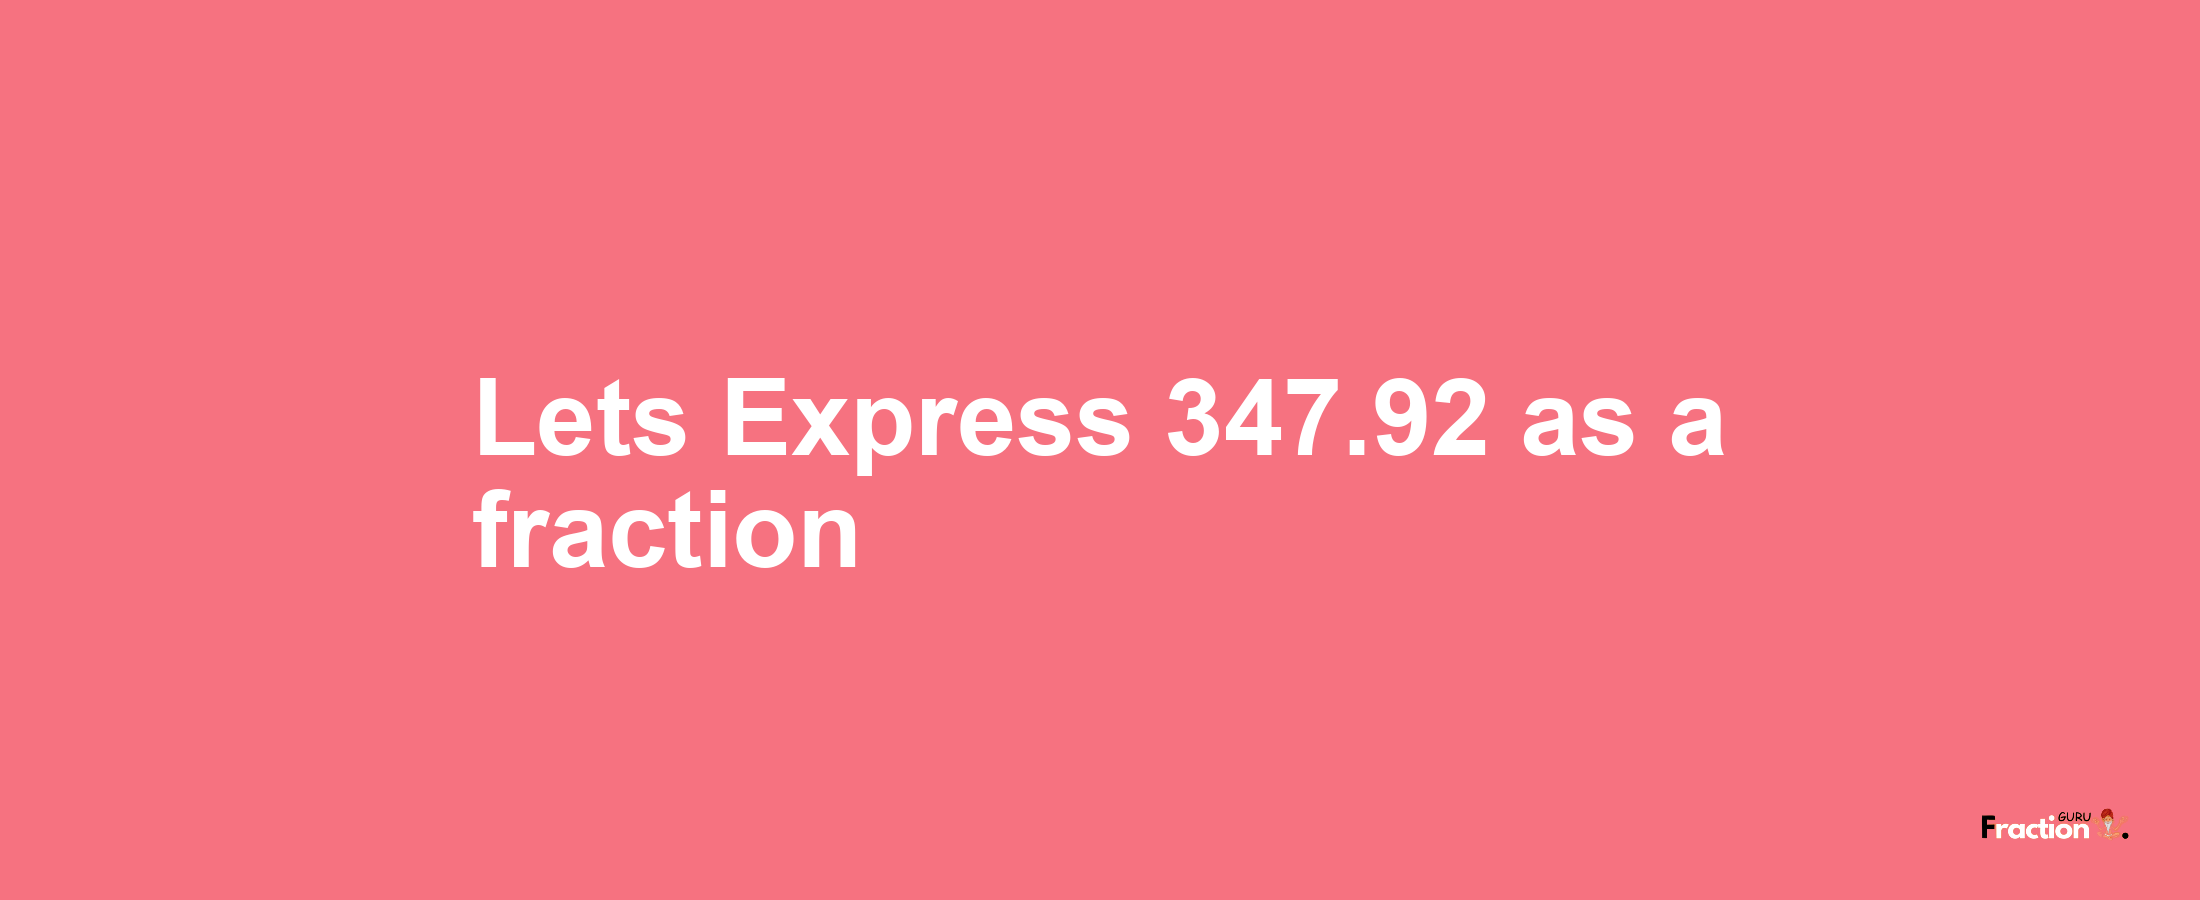 Lets Express 347.92 as afraction